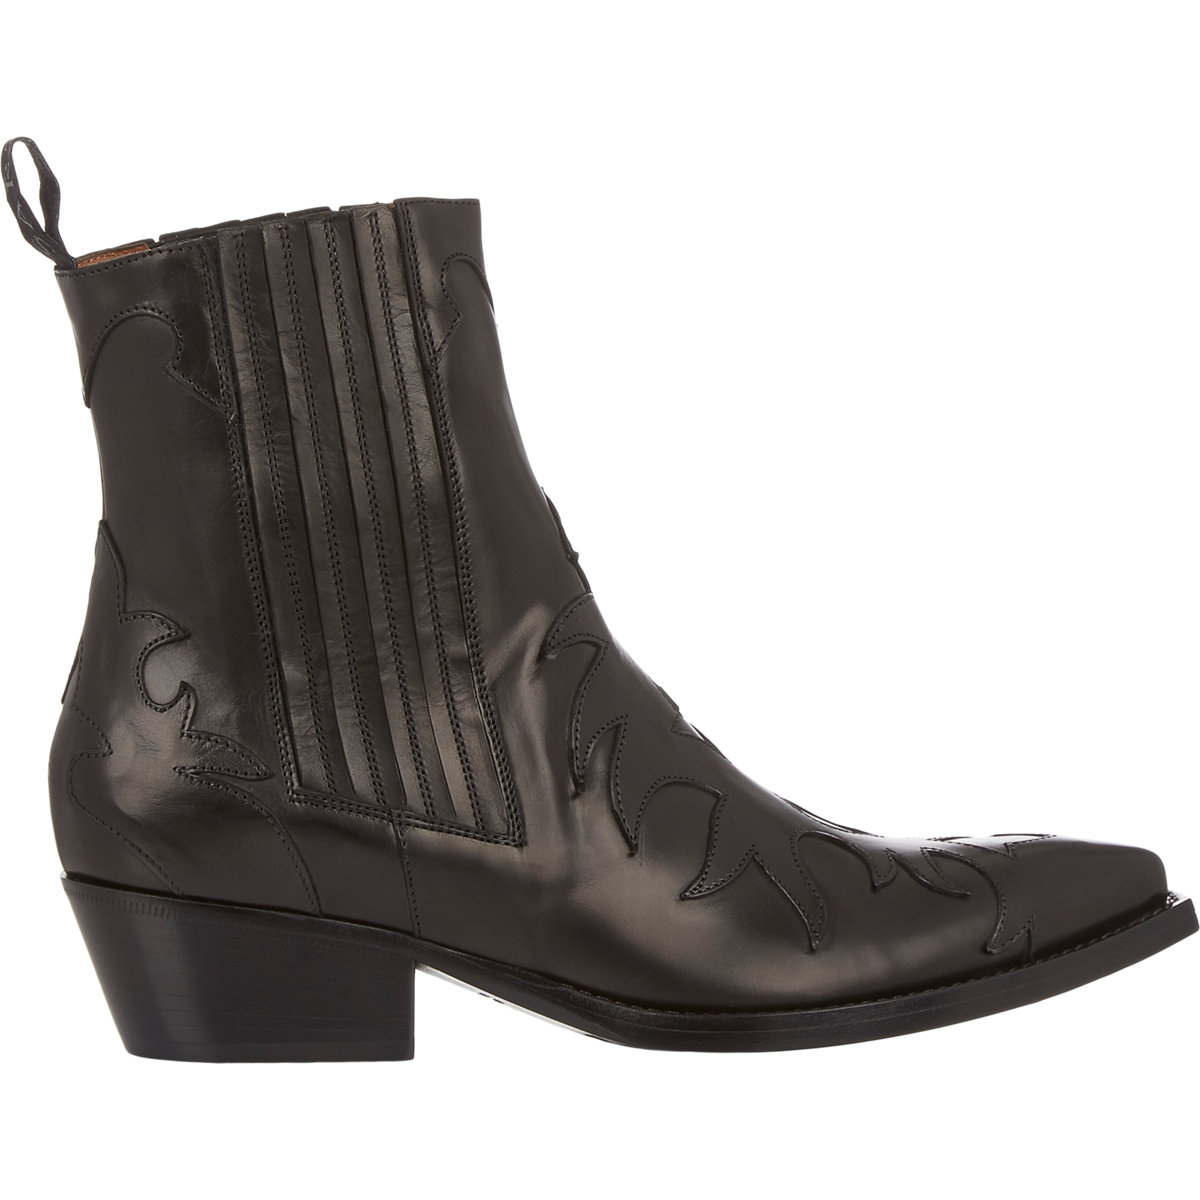 Sartore Topstitched Leather Cowboy Boots in Black | Lyst